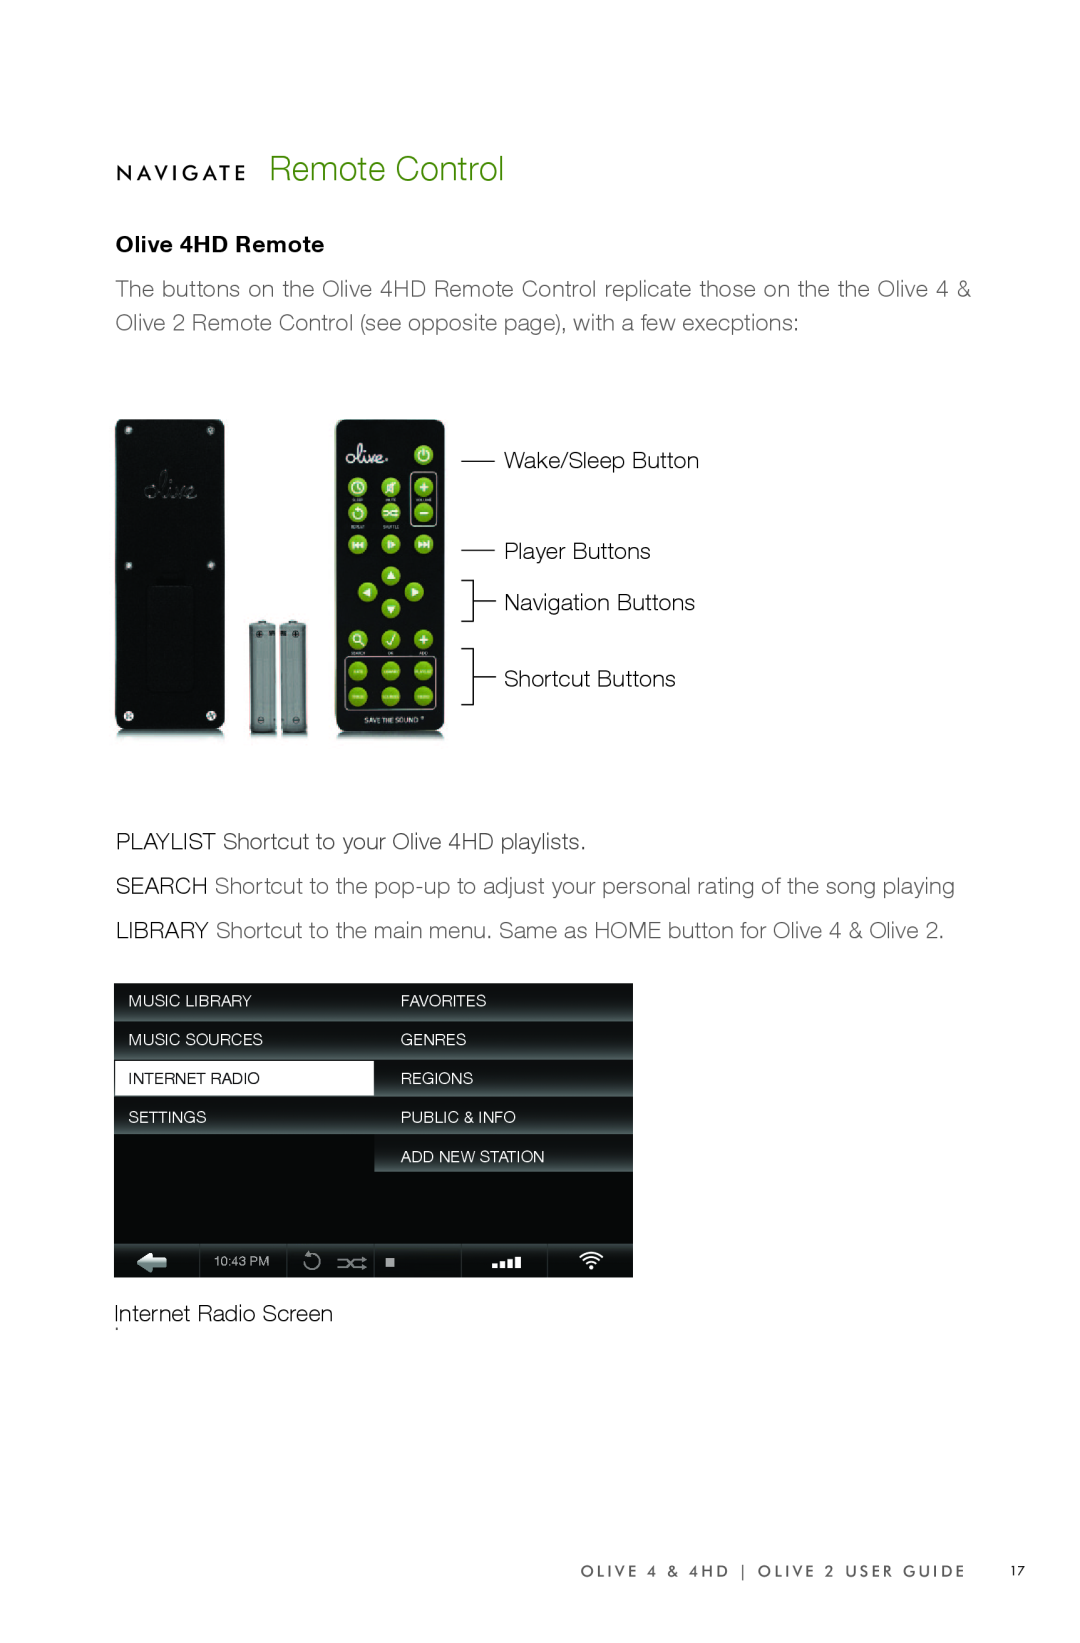 Olive Media Products Olive 4HD Remote, Wake/Sleep Button Player Buttons, Navigation Buttons Shortcut Buttons, 10 25 PM 